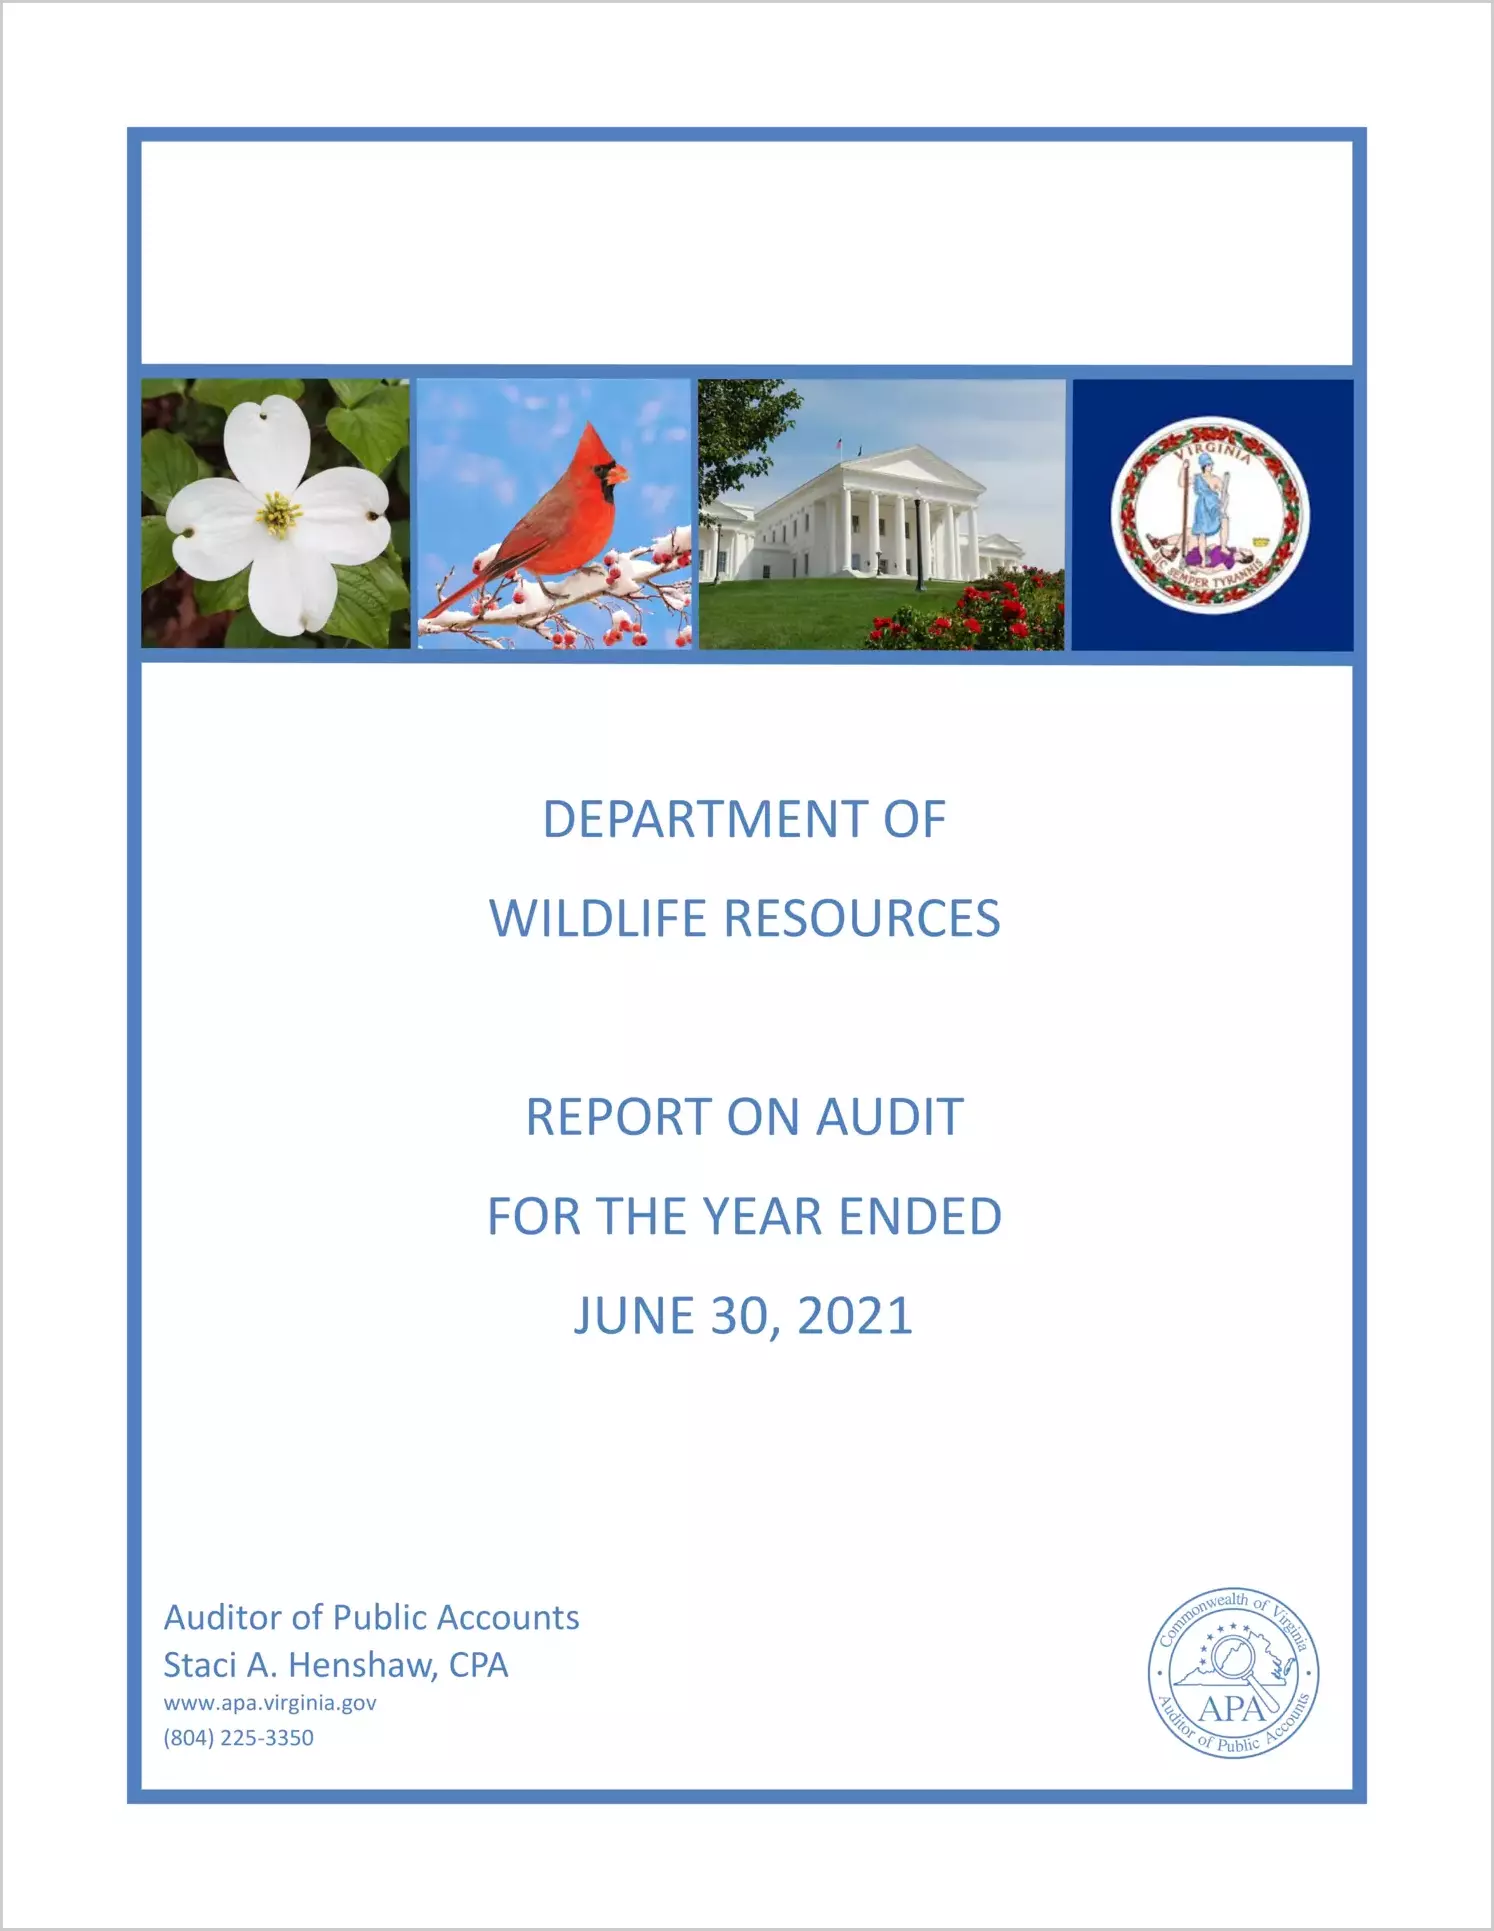 Department of Wildlife Resources for the year ended June 30, 2021